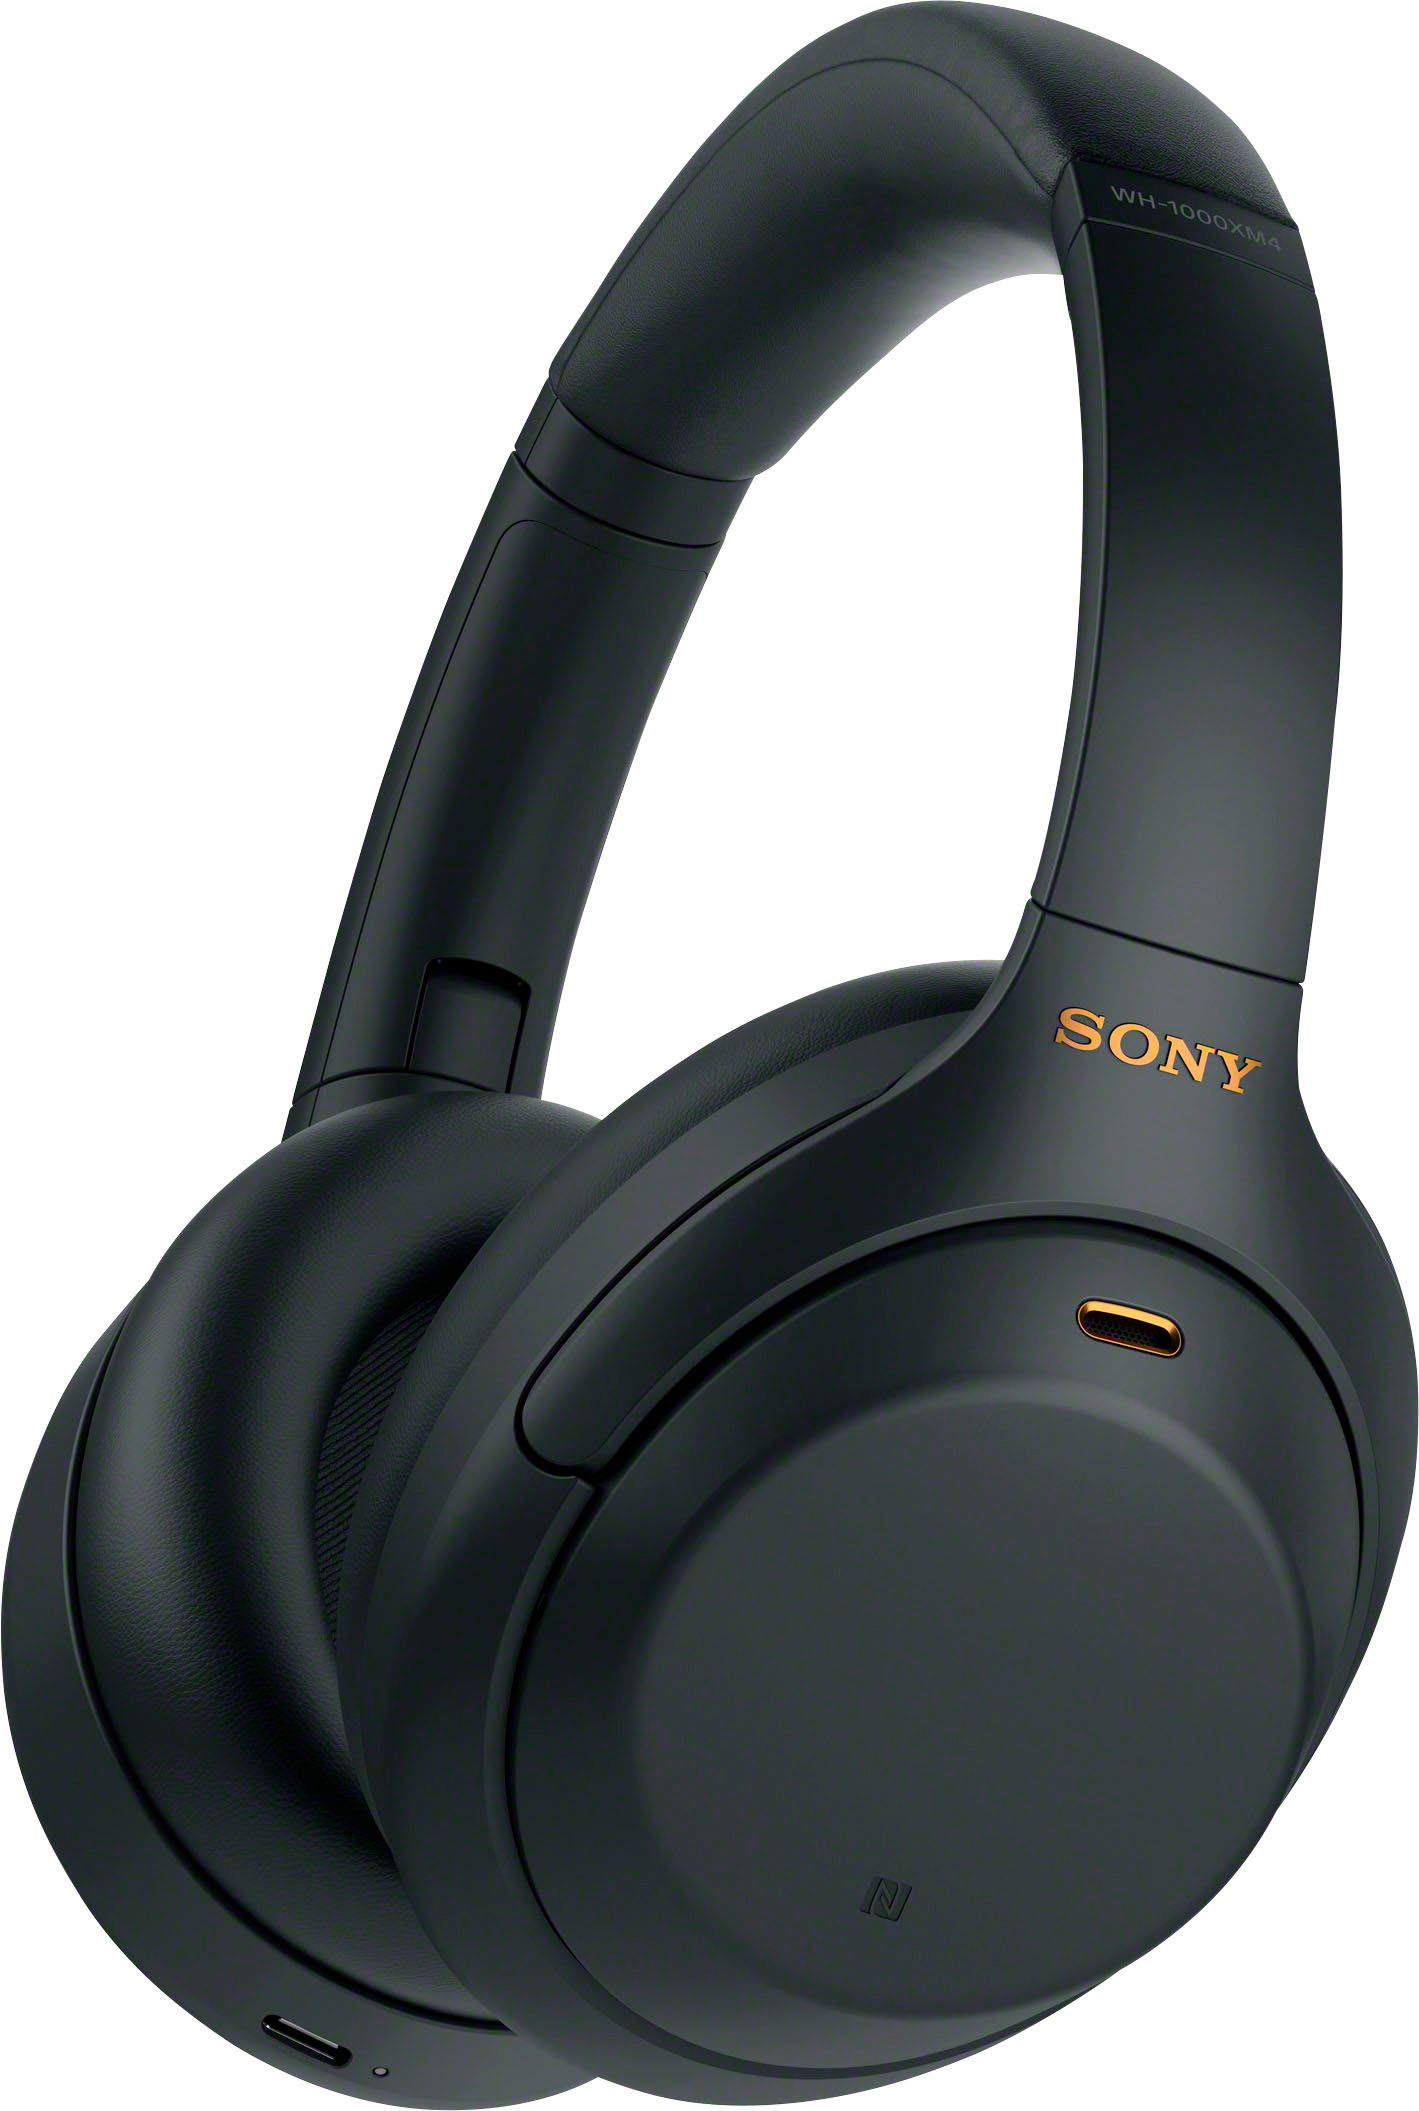 Sony WH1000XM4 Wireless Noise-Cancelling Over-the-Ear Headphones Black WH1000XM4/B - Best Buy | Best Buy U.S.